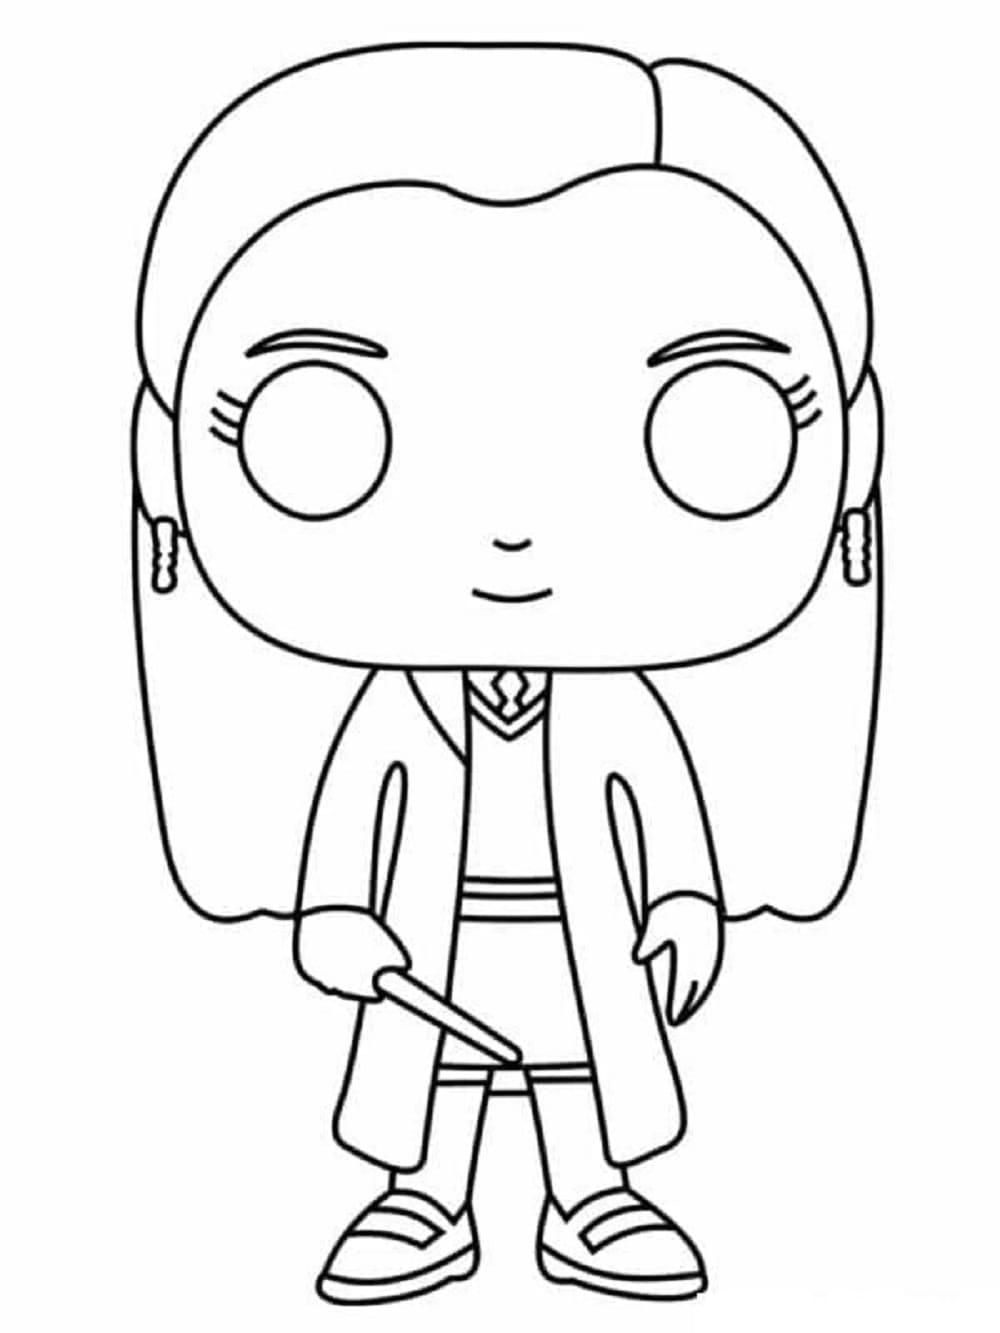 Printable Funko Pop Ginny Weasley Coloring Page